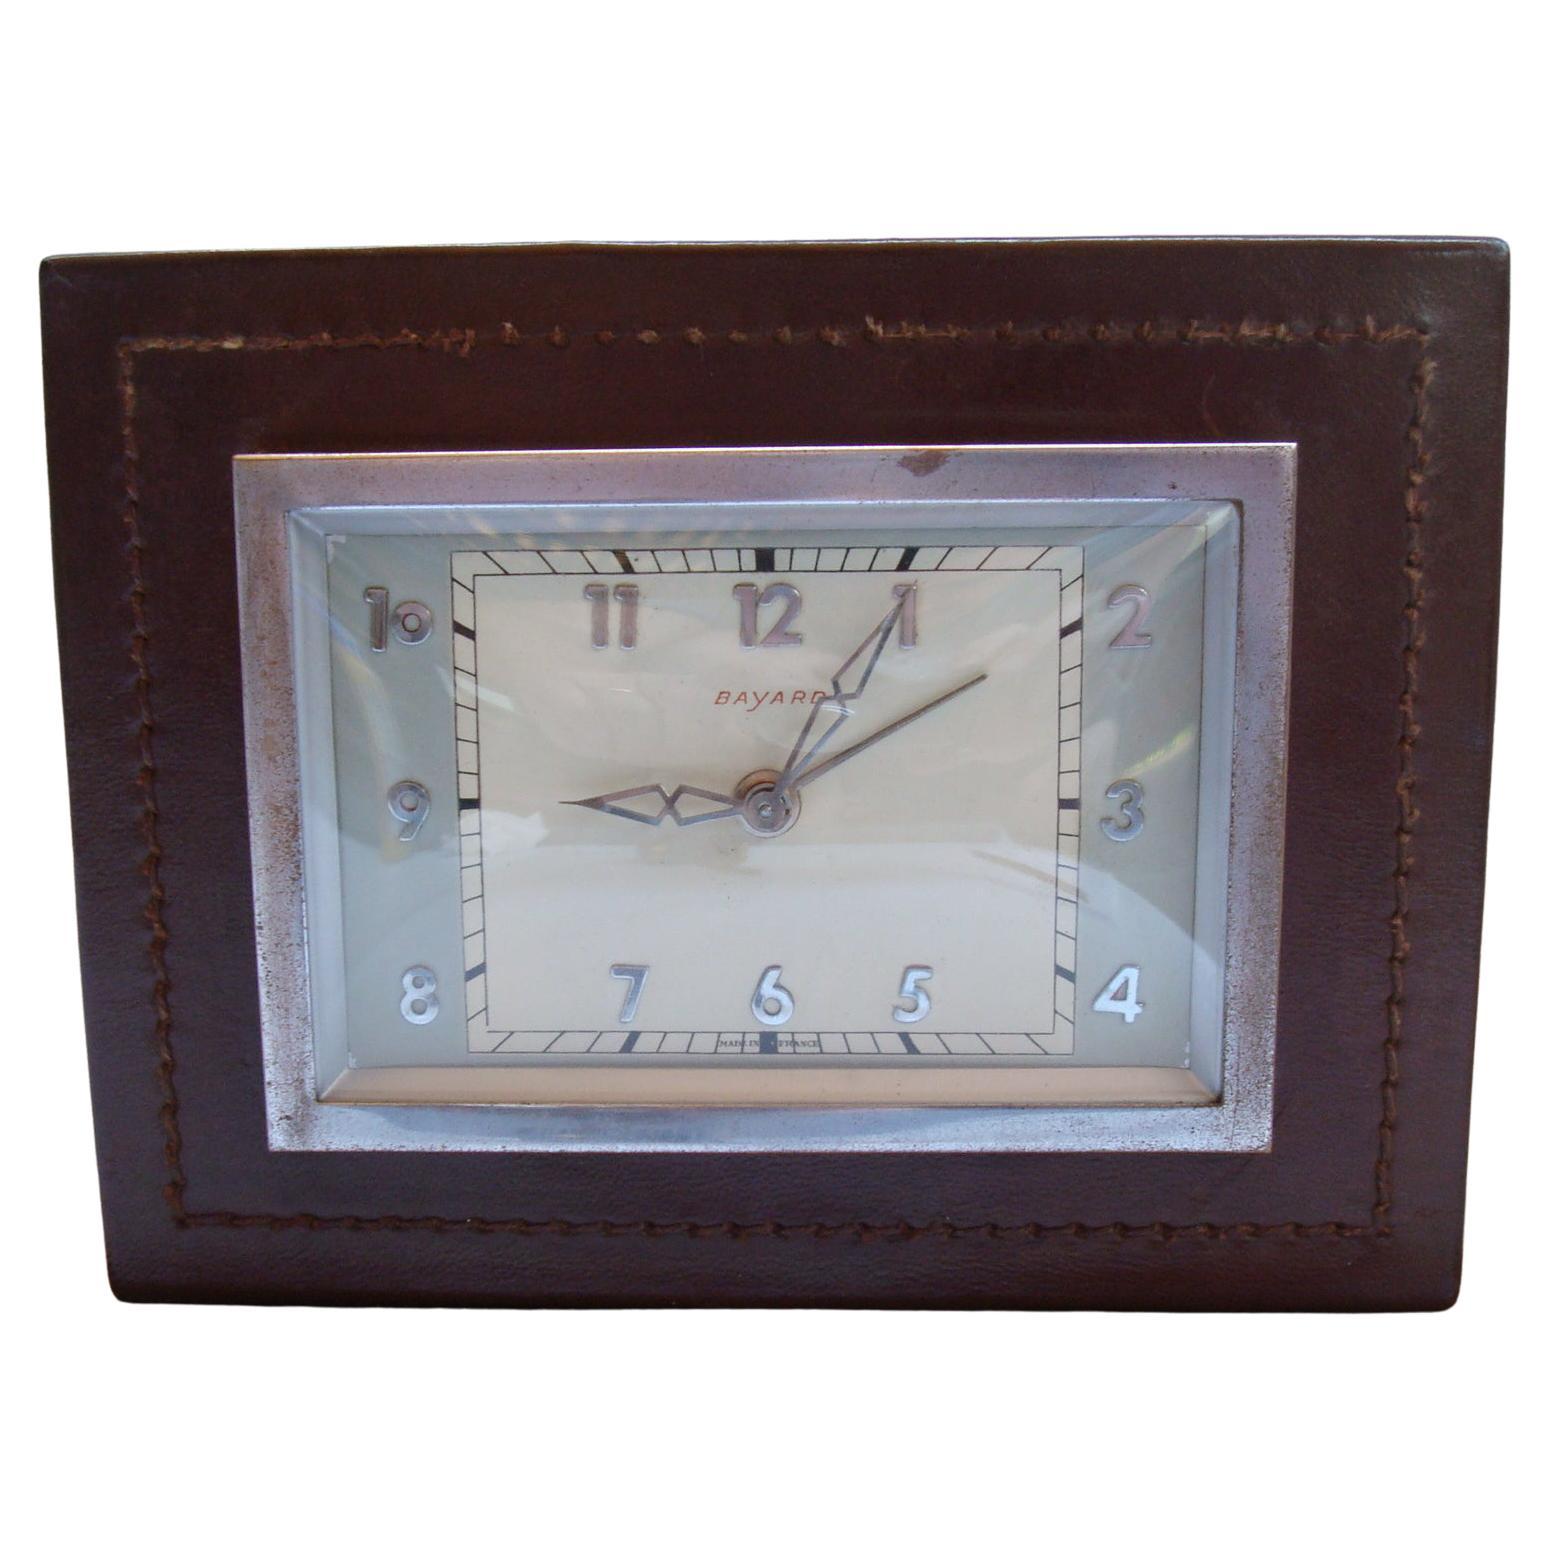 Handsome French Handstitched brown leather desk clock by Bayard. 
Great Restored condition. Keeps good time. Excellent patina. Great vintage condition.
Paul Dupré-Lafon / Adnet Style Leather Clock by Bayard.

 